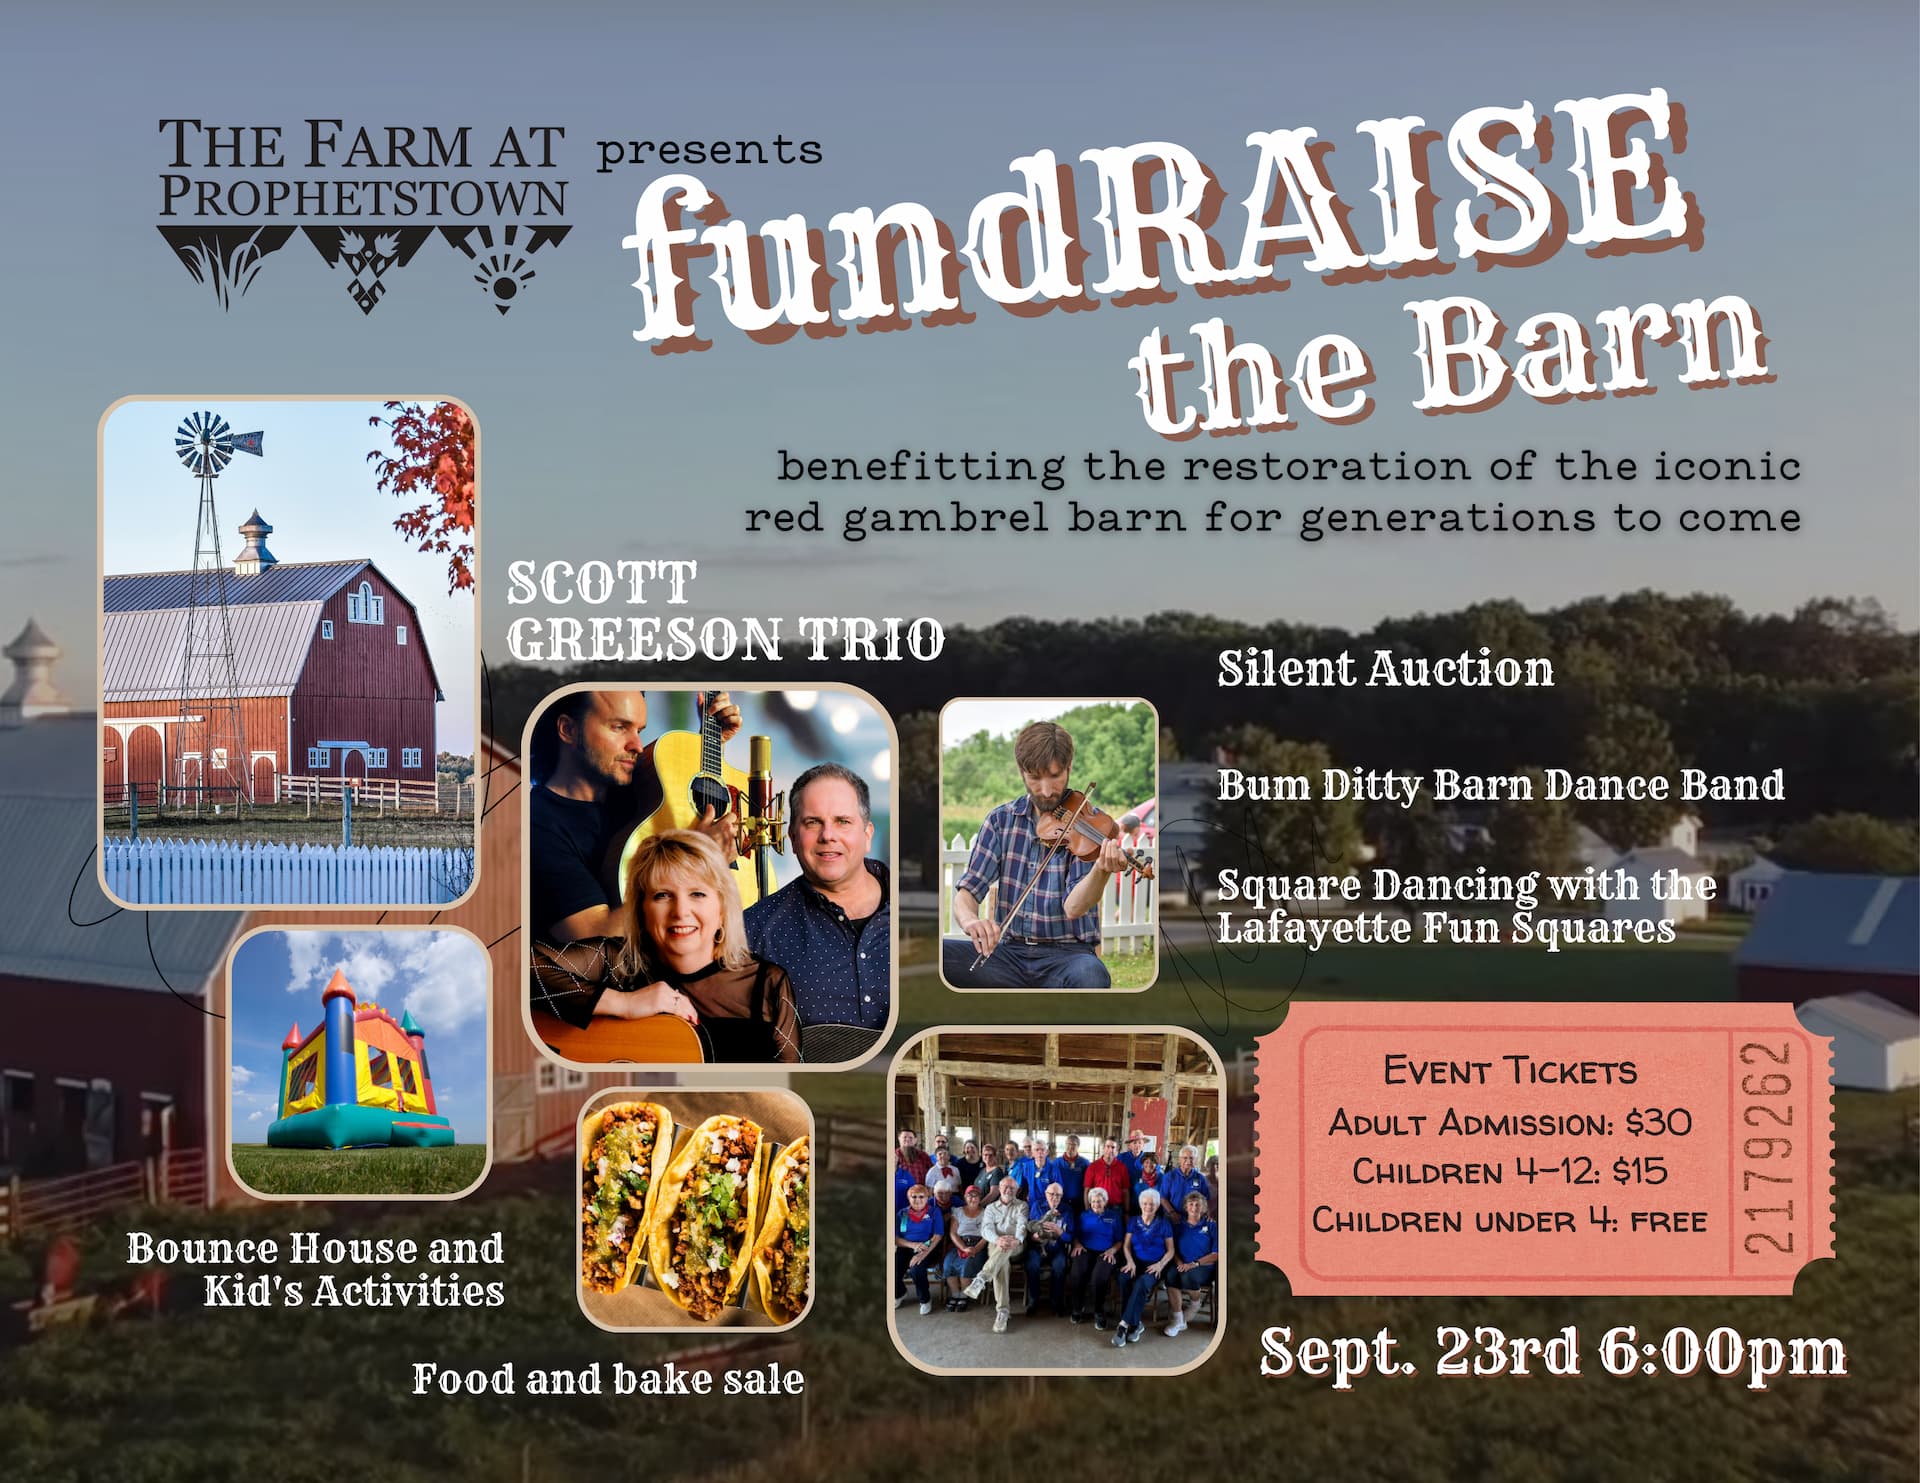 fundRAISE the Barn - an event benefitting the restoration the iconic red gambrel barn for generations to come! September 23 at 6 PM.